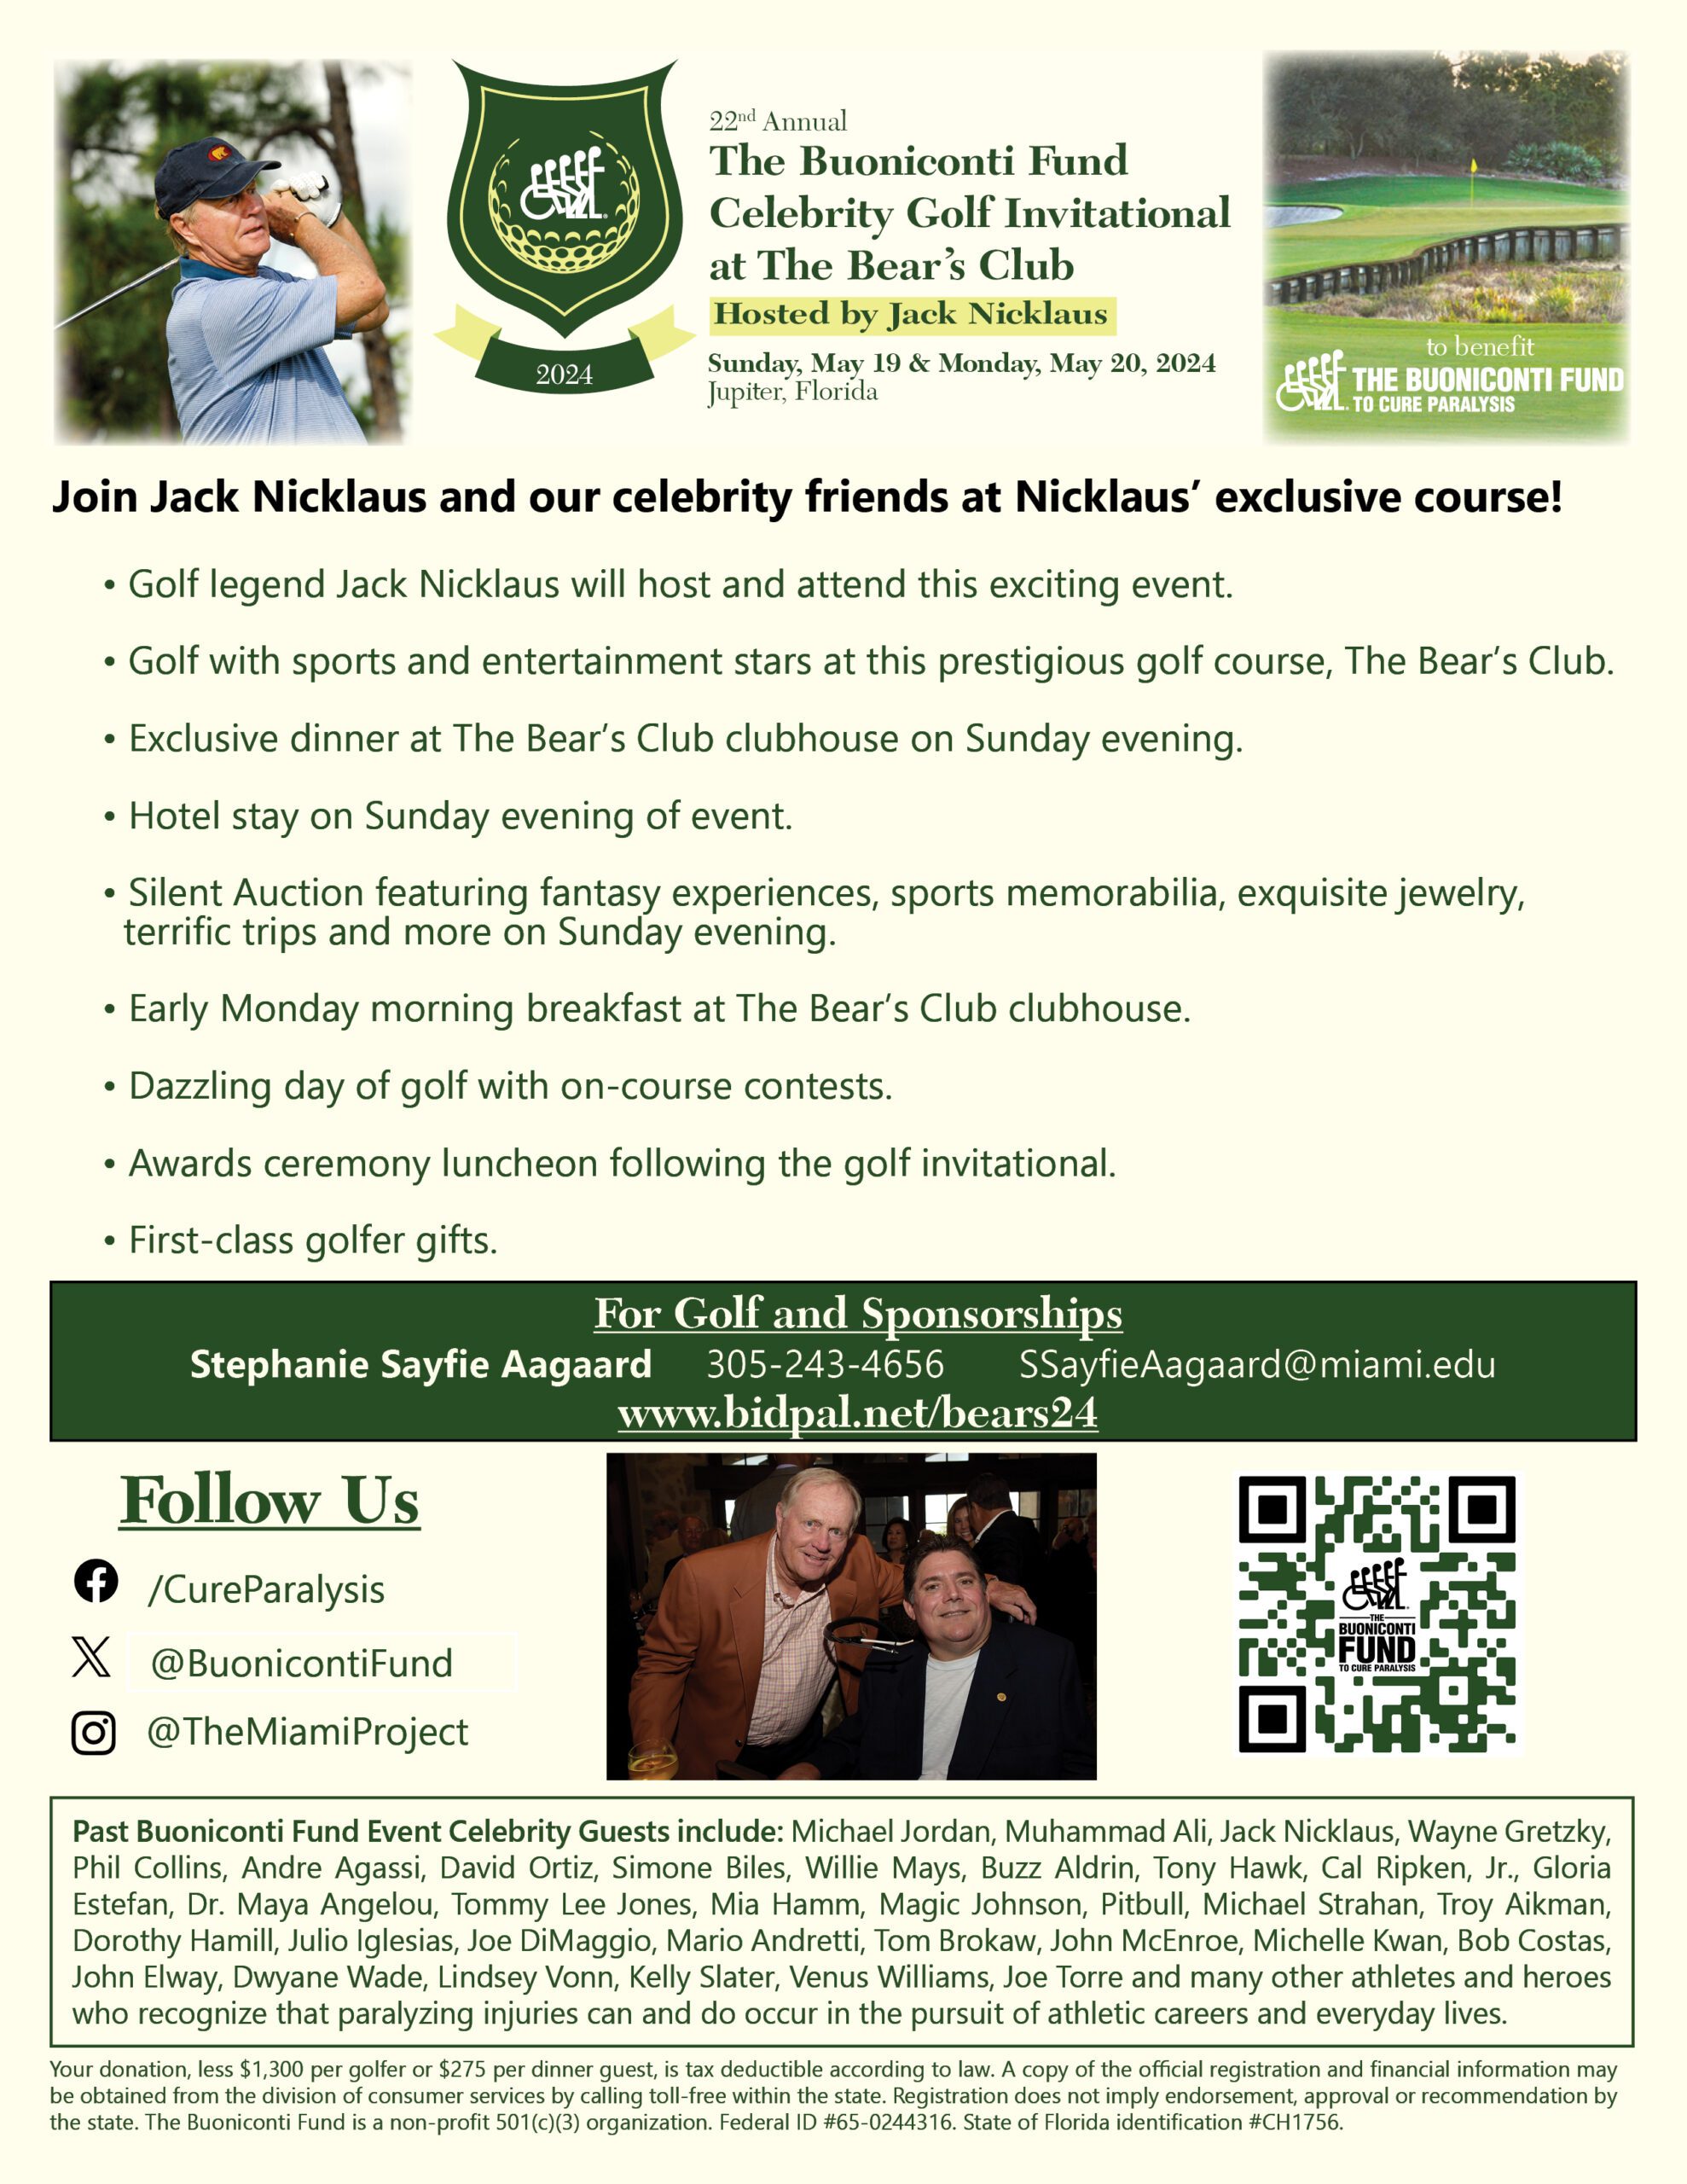 22nd Annual Celebrity Golf Invitational at The Bear's Club hosted by Jack Nicklaus